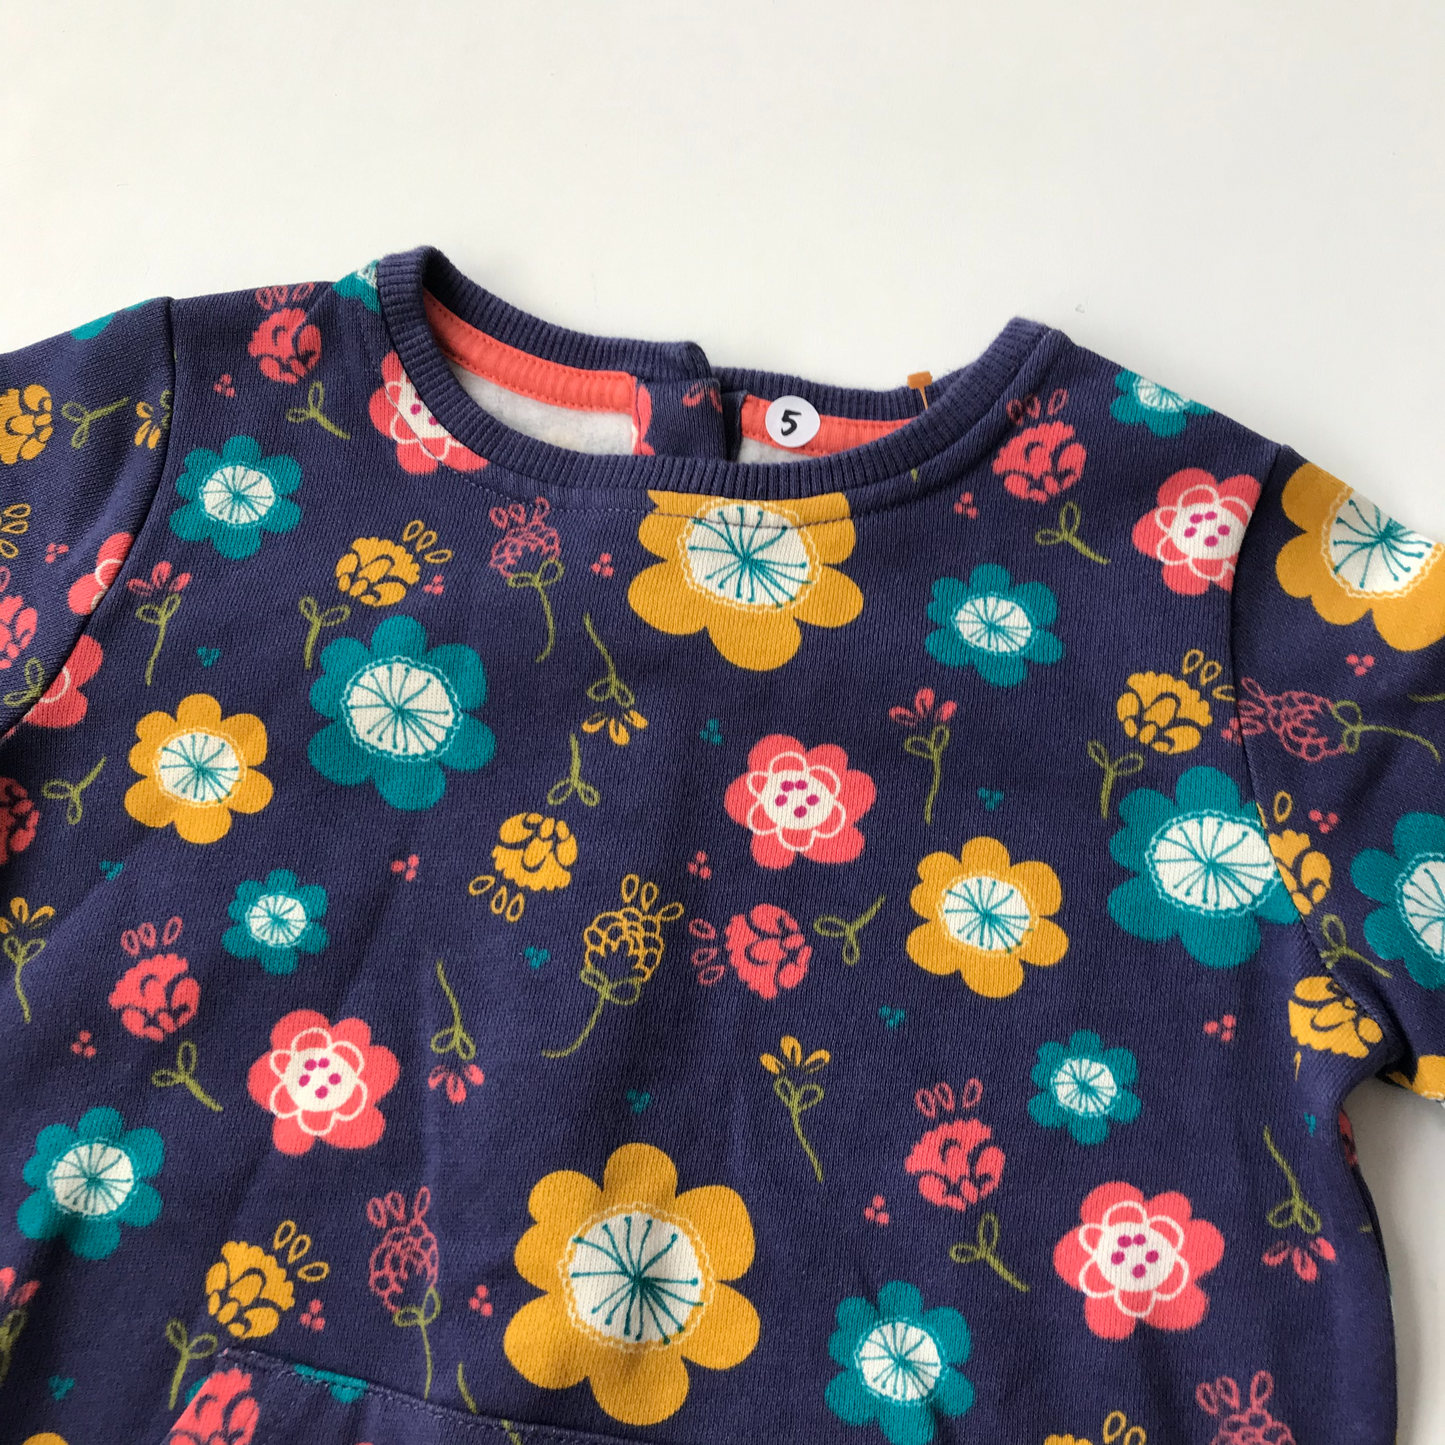 Sweatshirt - Floral with Short Sleeves - Age 5